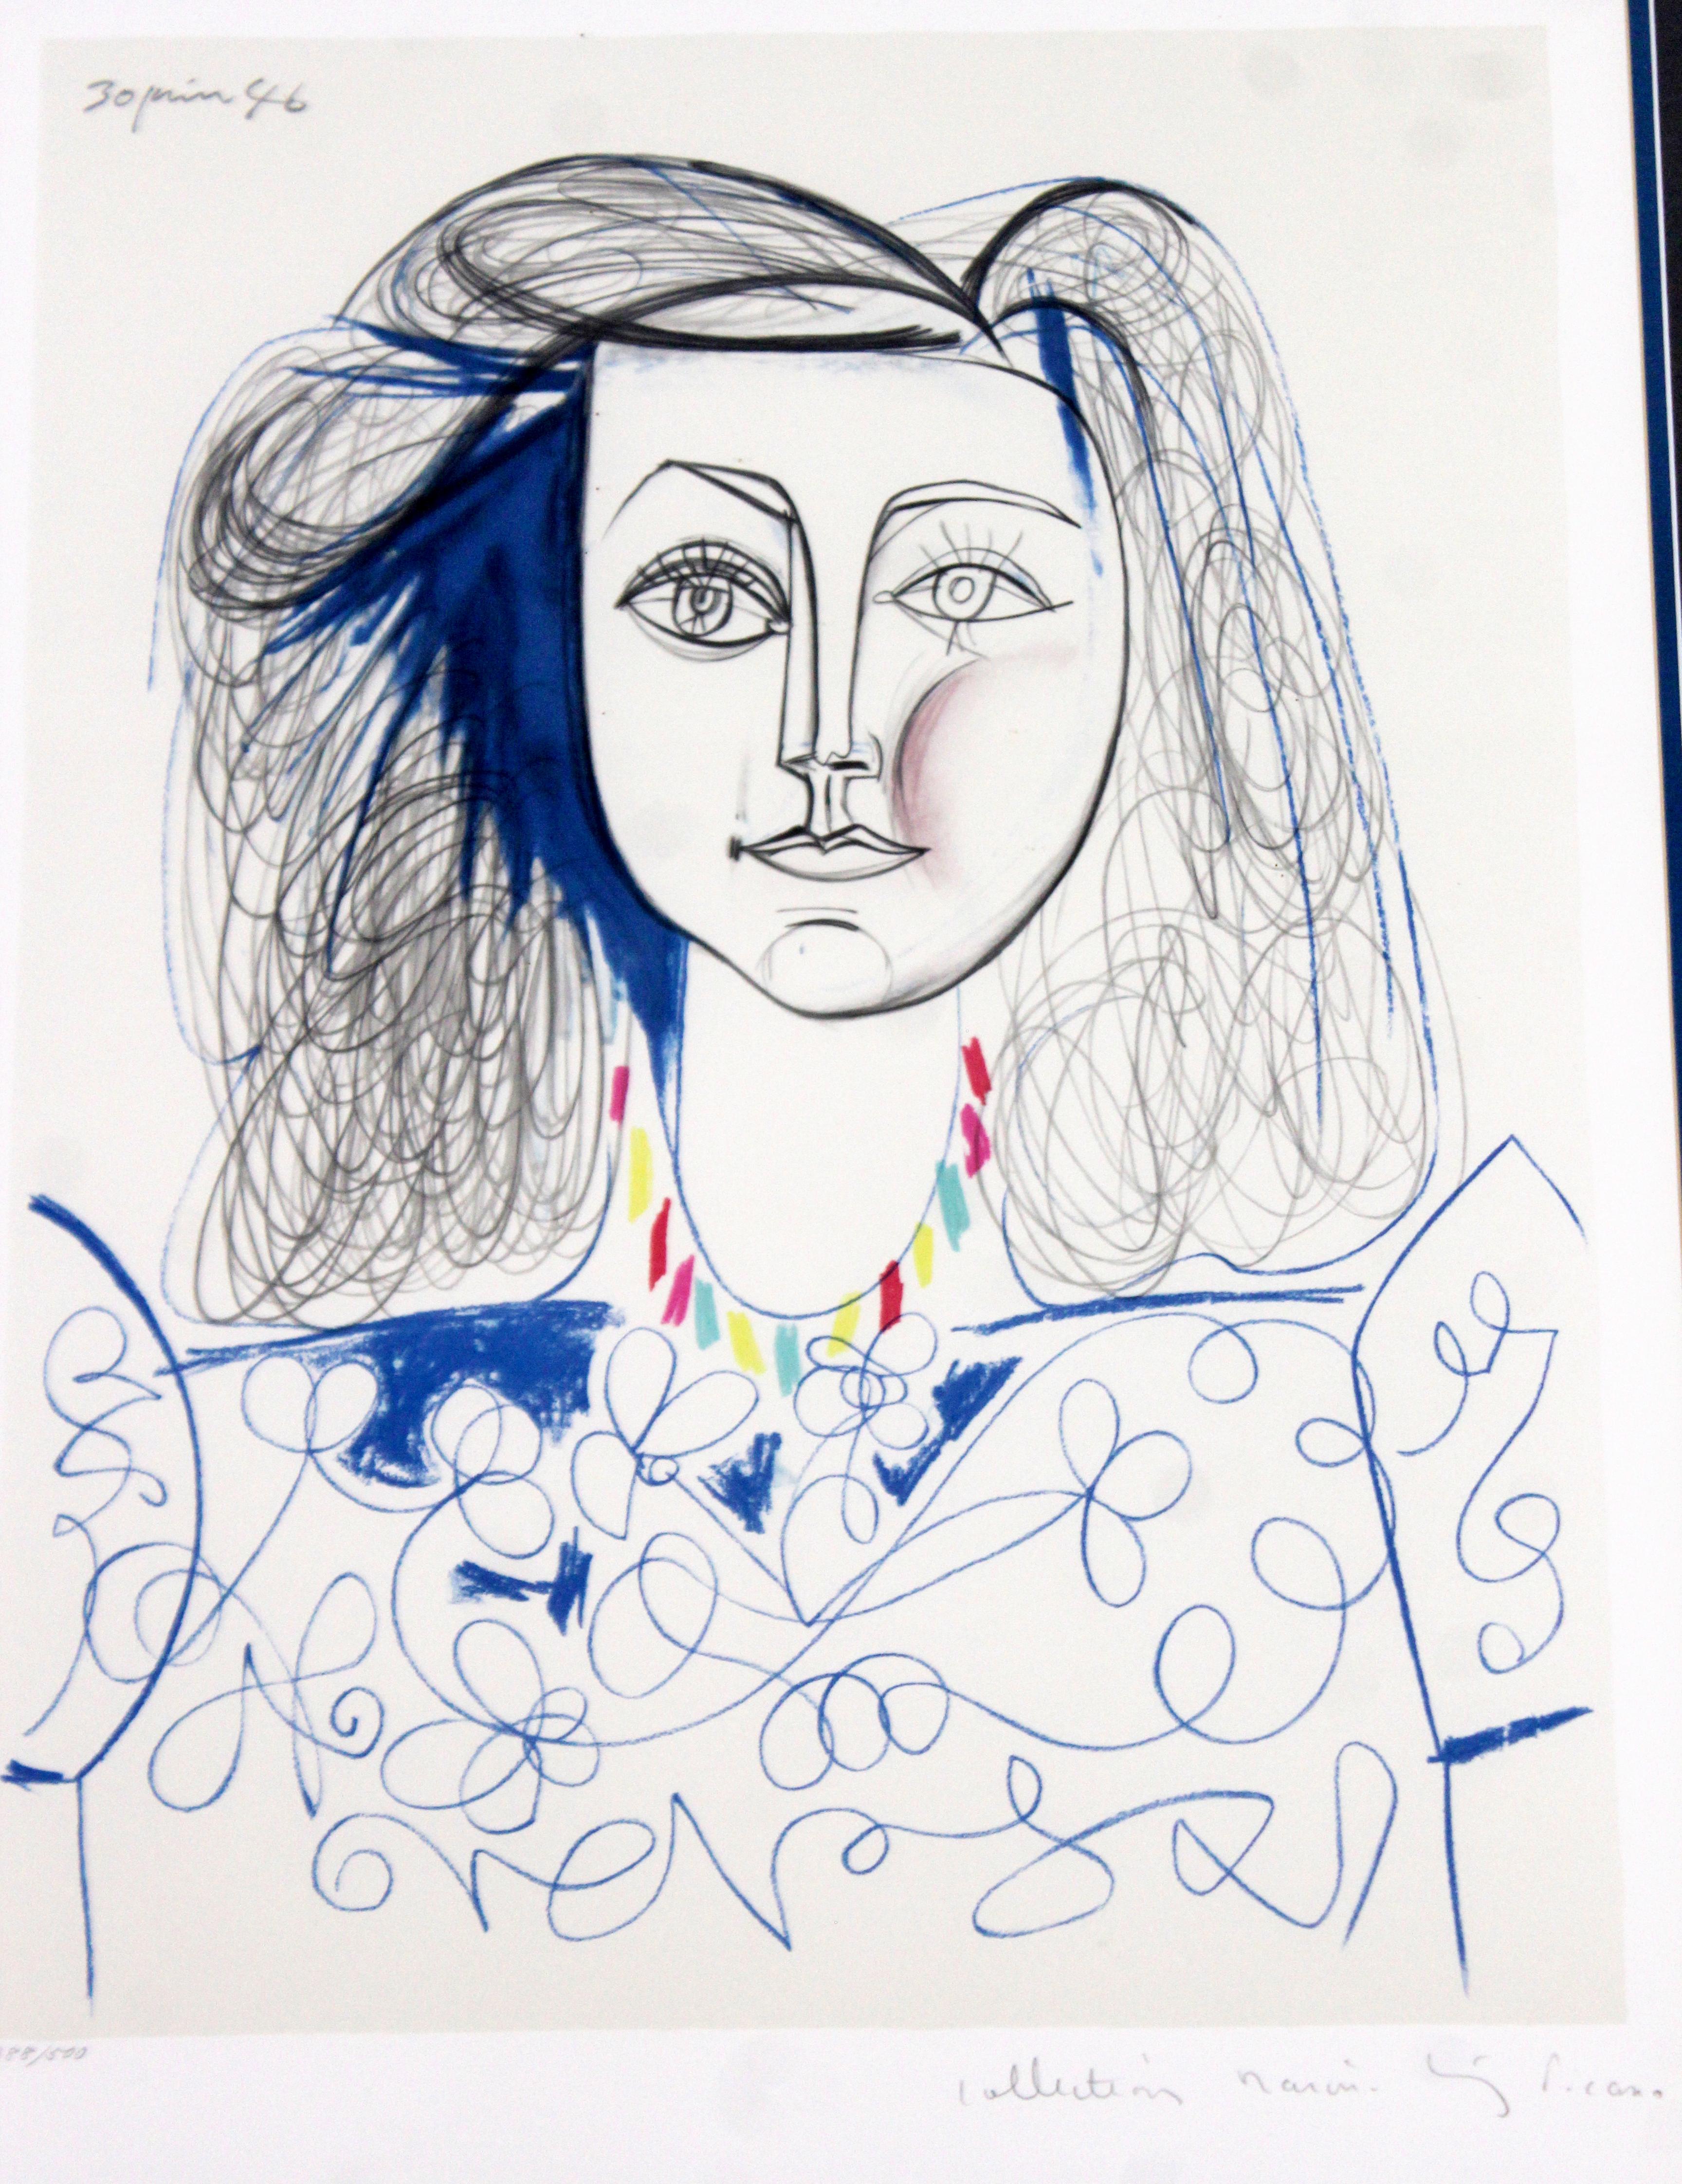 For your consideration is an extraordinarily rare lithograph, from the series Portrait de Femme estate, signed by Marina Picasso in silver frame. This image is extremely hard to find-work approved by the heirs of Picasso. Pablo Picasso is best known